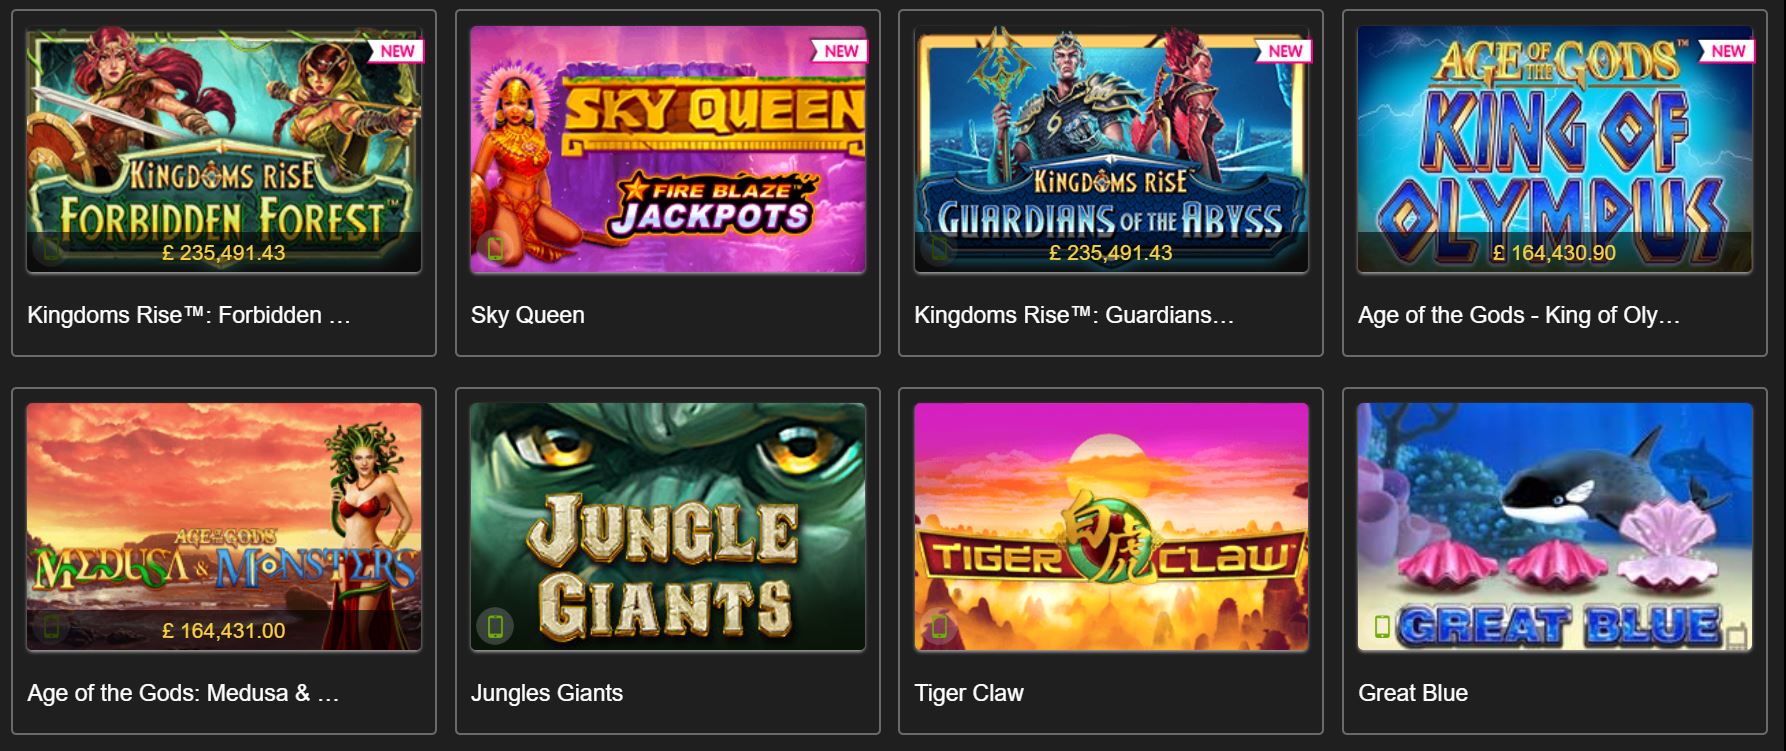 You have slot games available at titanbet.